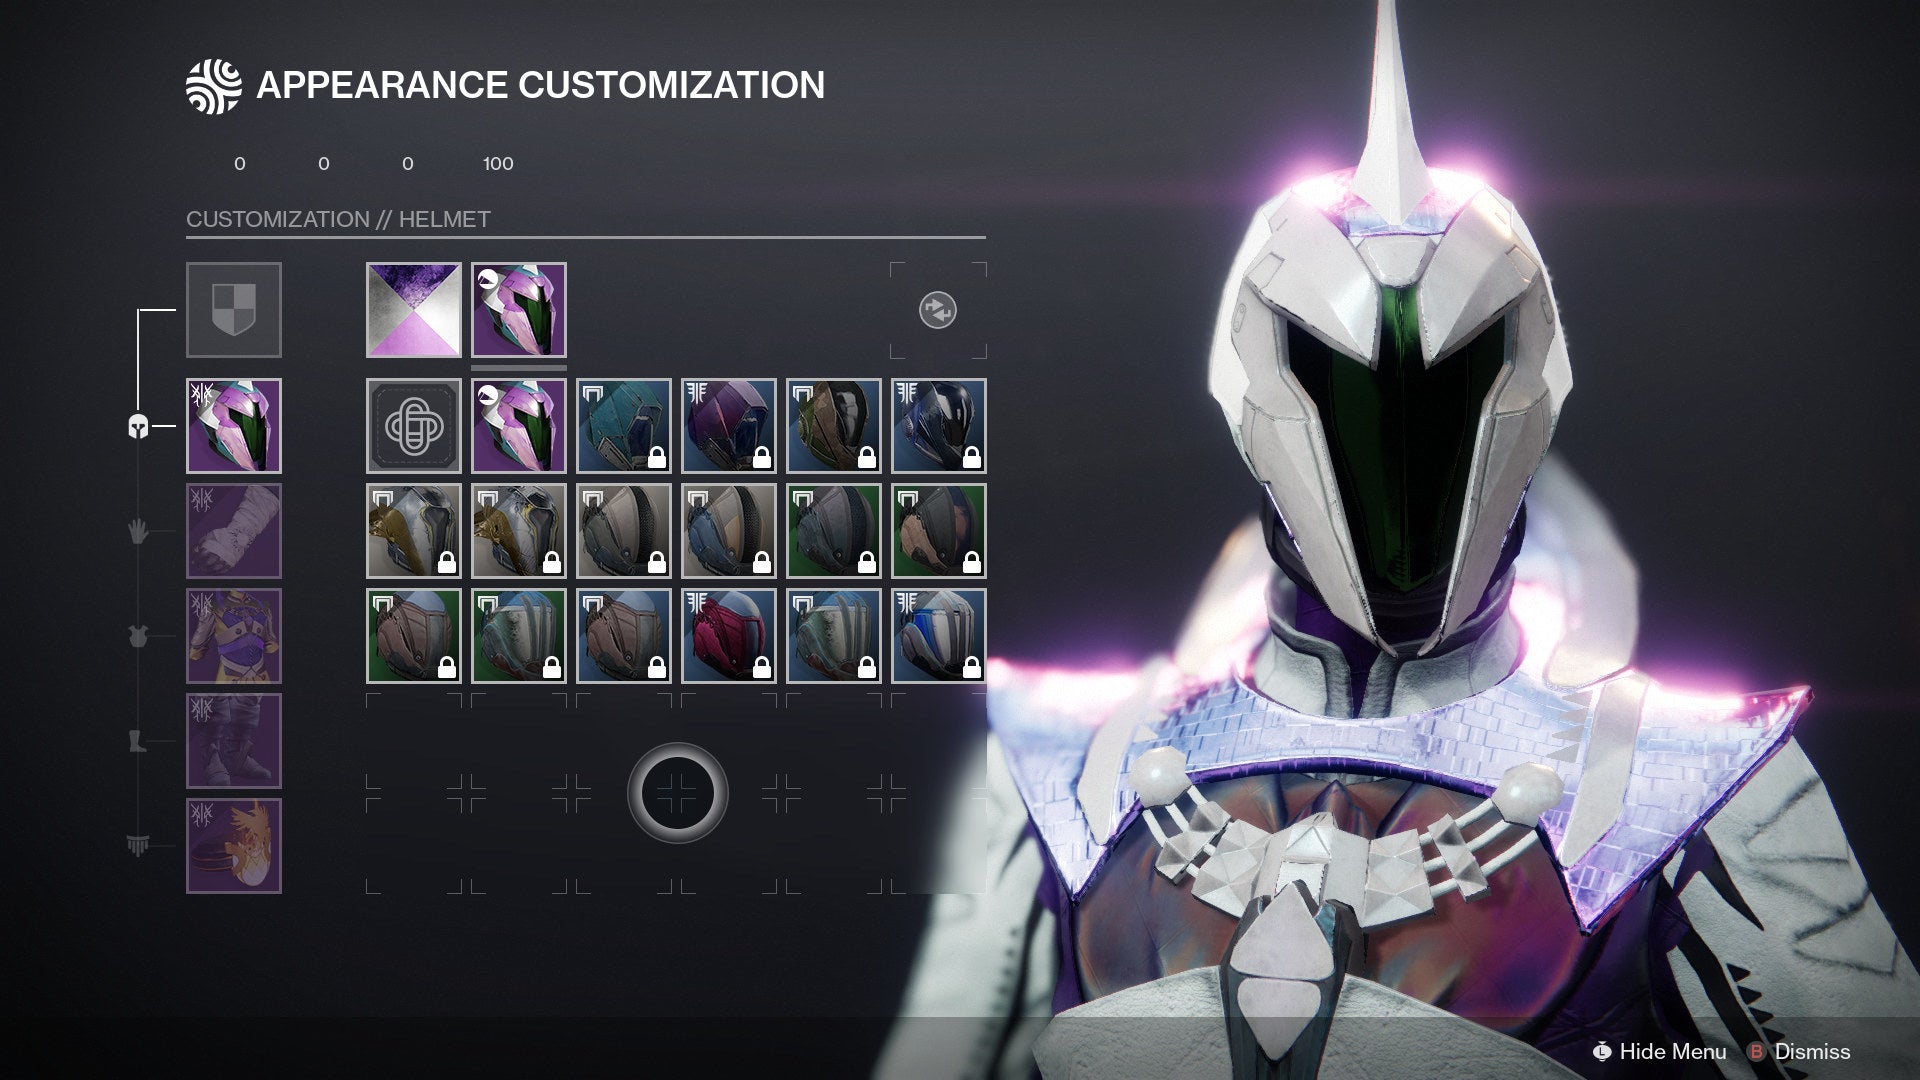 A peek at Destiny 2's appearance customisation screen coming with Armor Synthesis.